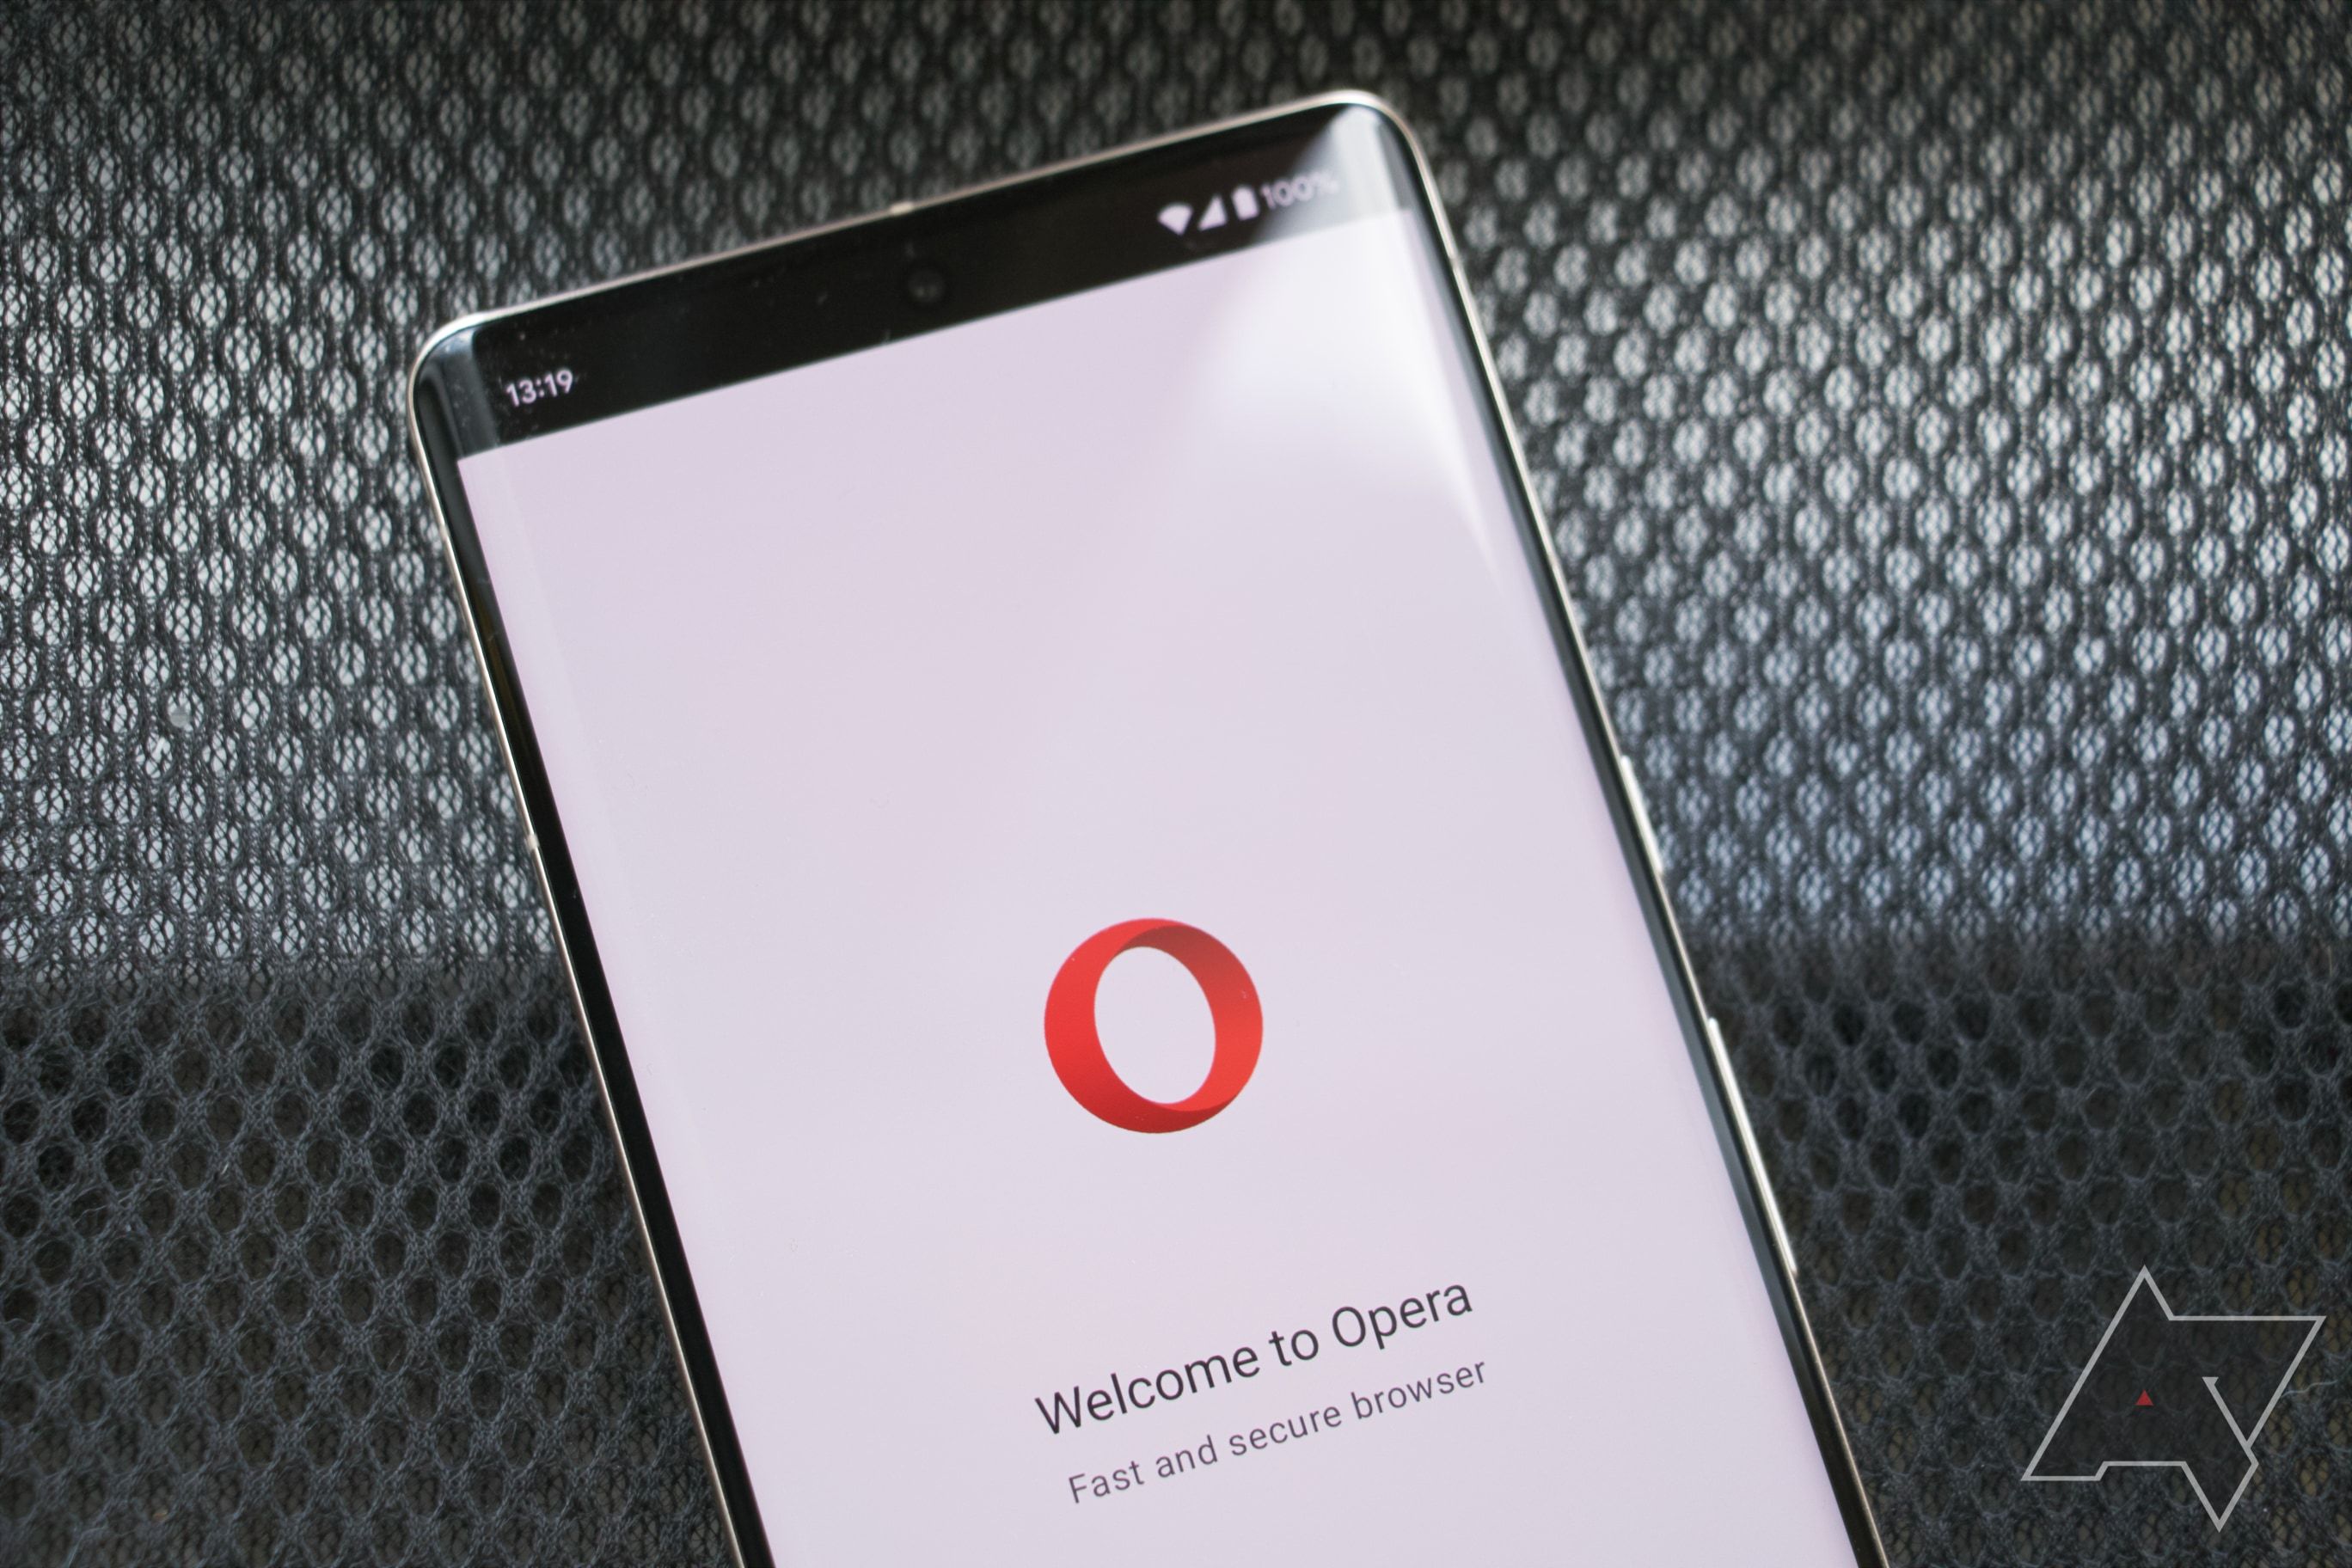 A Google Pixel 7 Pro on a mesh background with Opera logo displayed on its screen